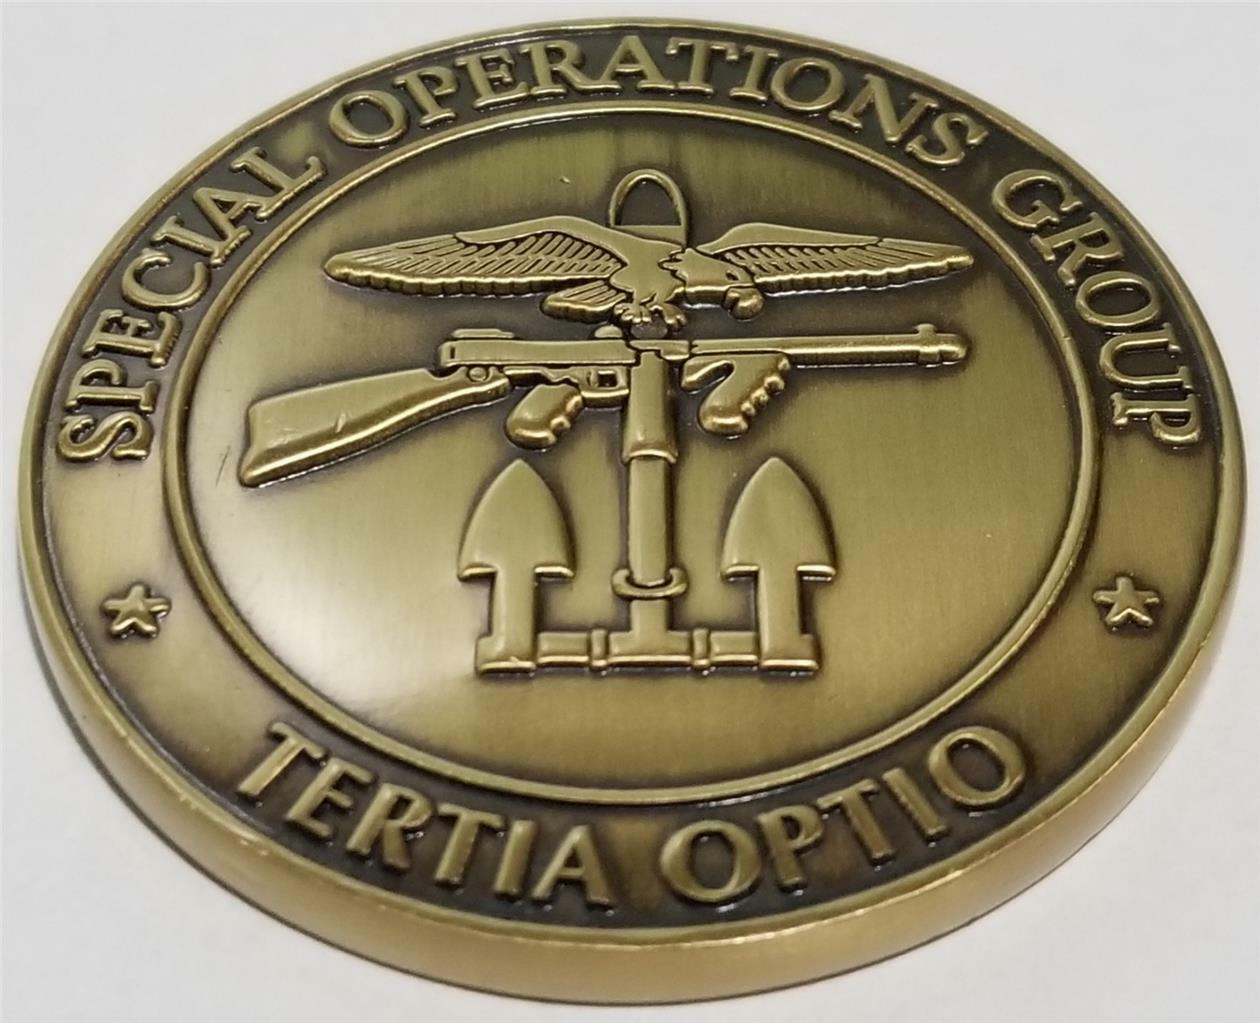 CIA SOG Special Operations Group Personnel Recovery Challenge Coin TERTIA OPTIO